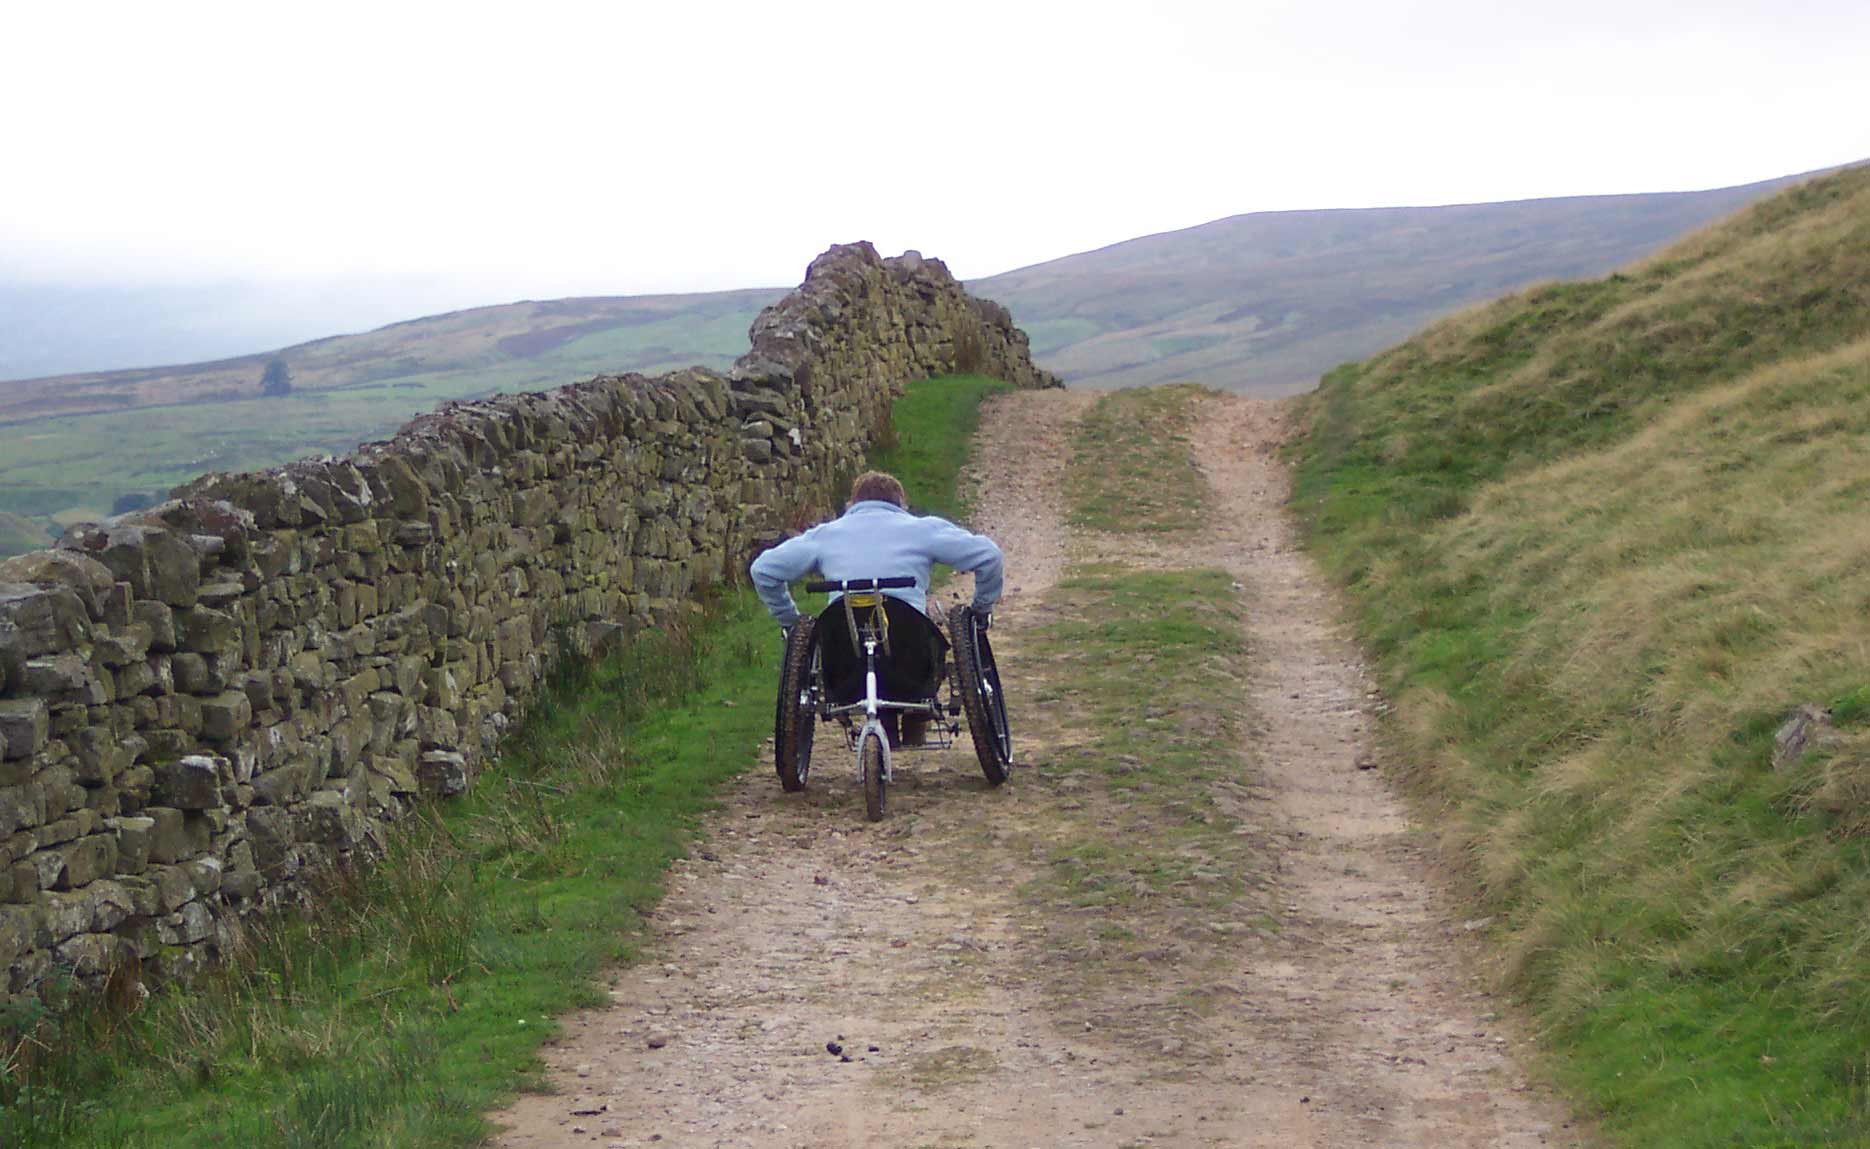 Trekinetic K2 wheelchair user going up rocky trail with hills in background